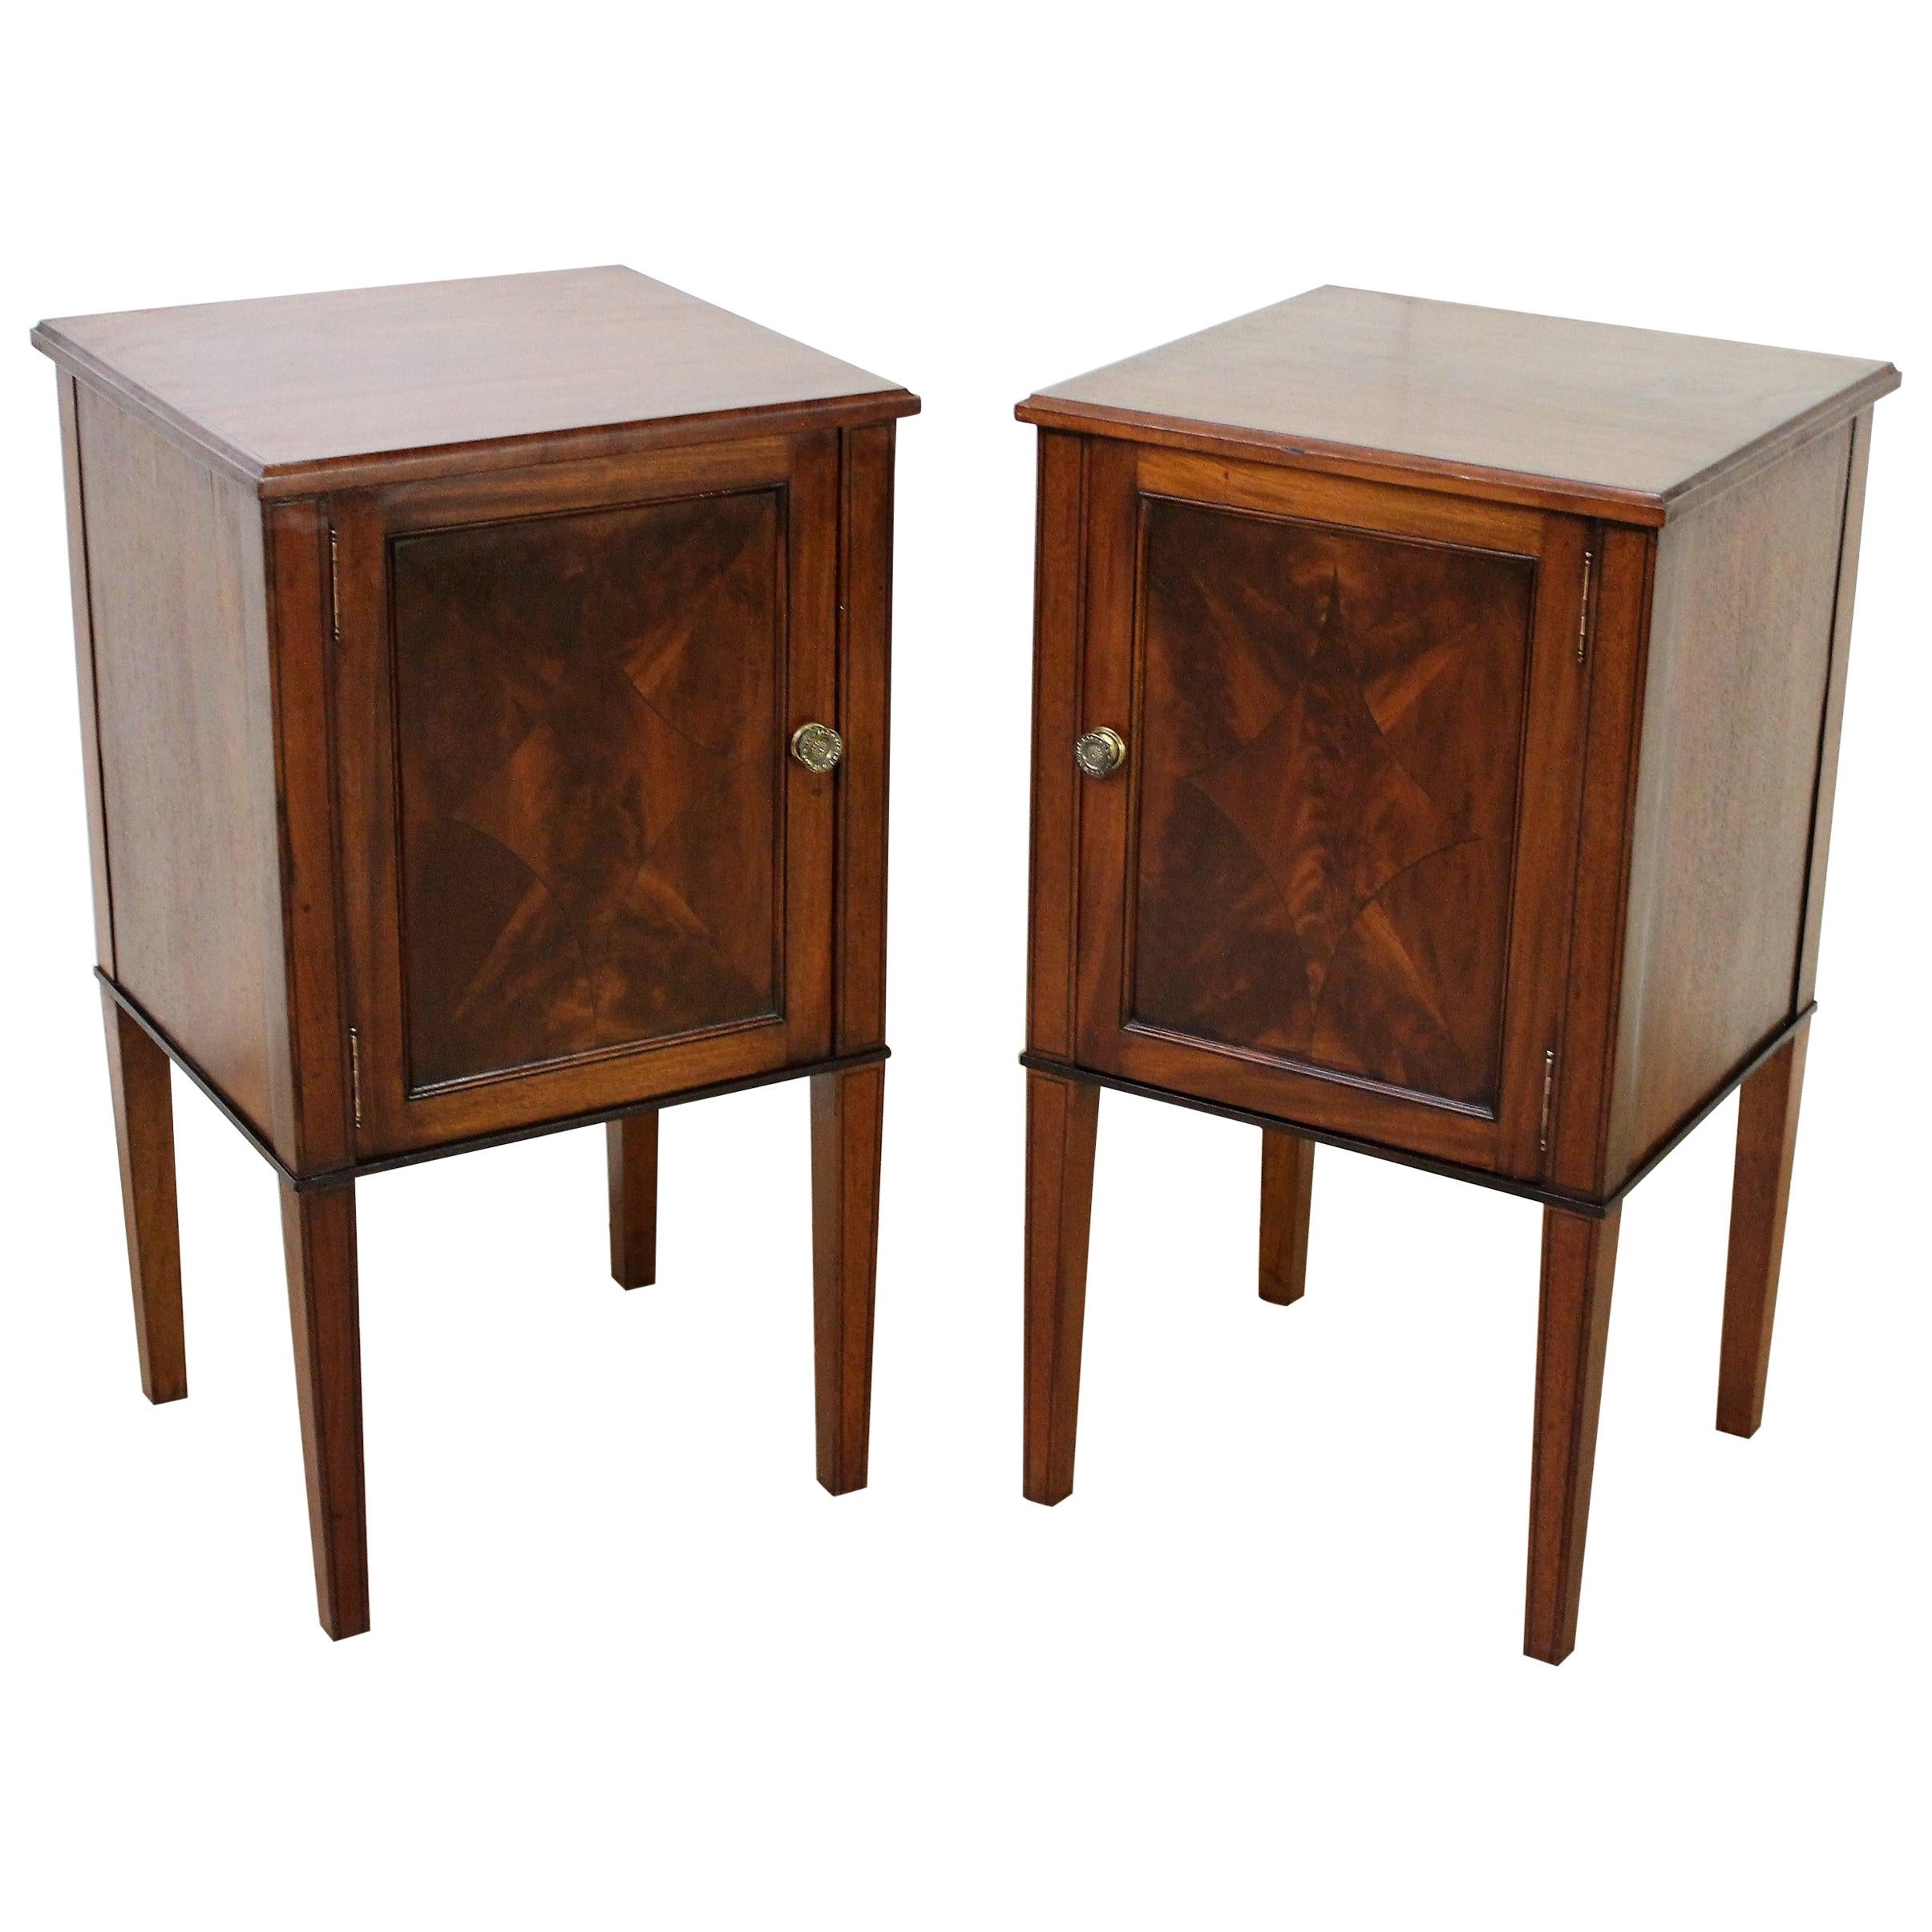 Pair of Edwardian Inlaid Mahogany Bedside Cupboards